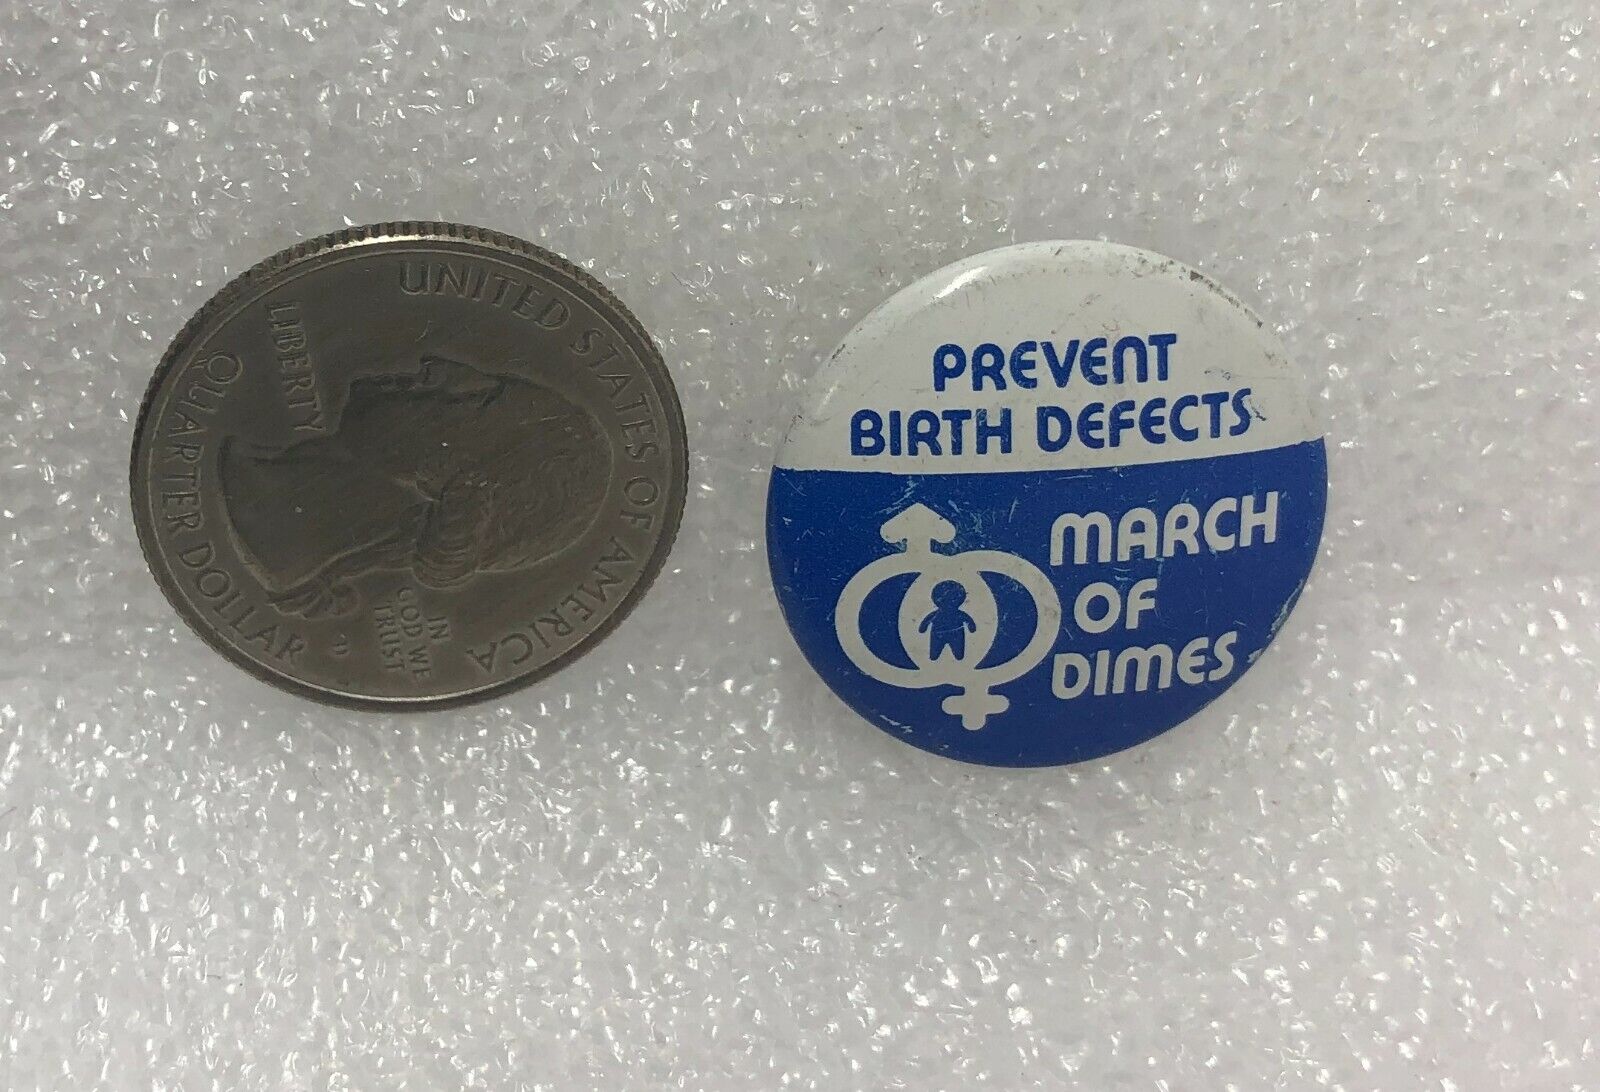 March Of Dimes Prevent Birth Defects Pin